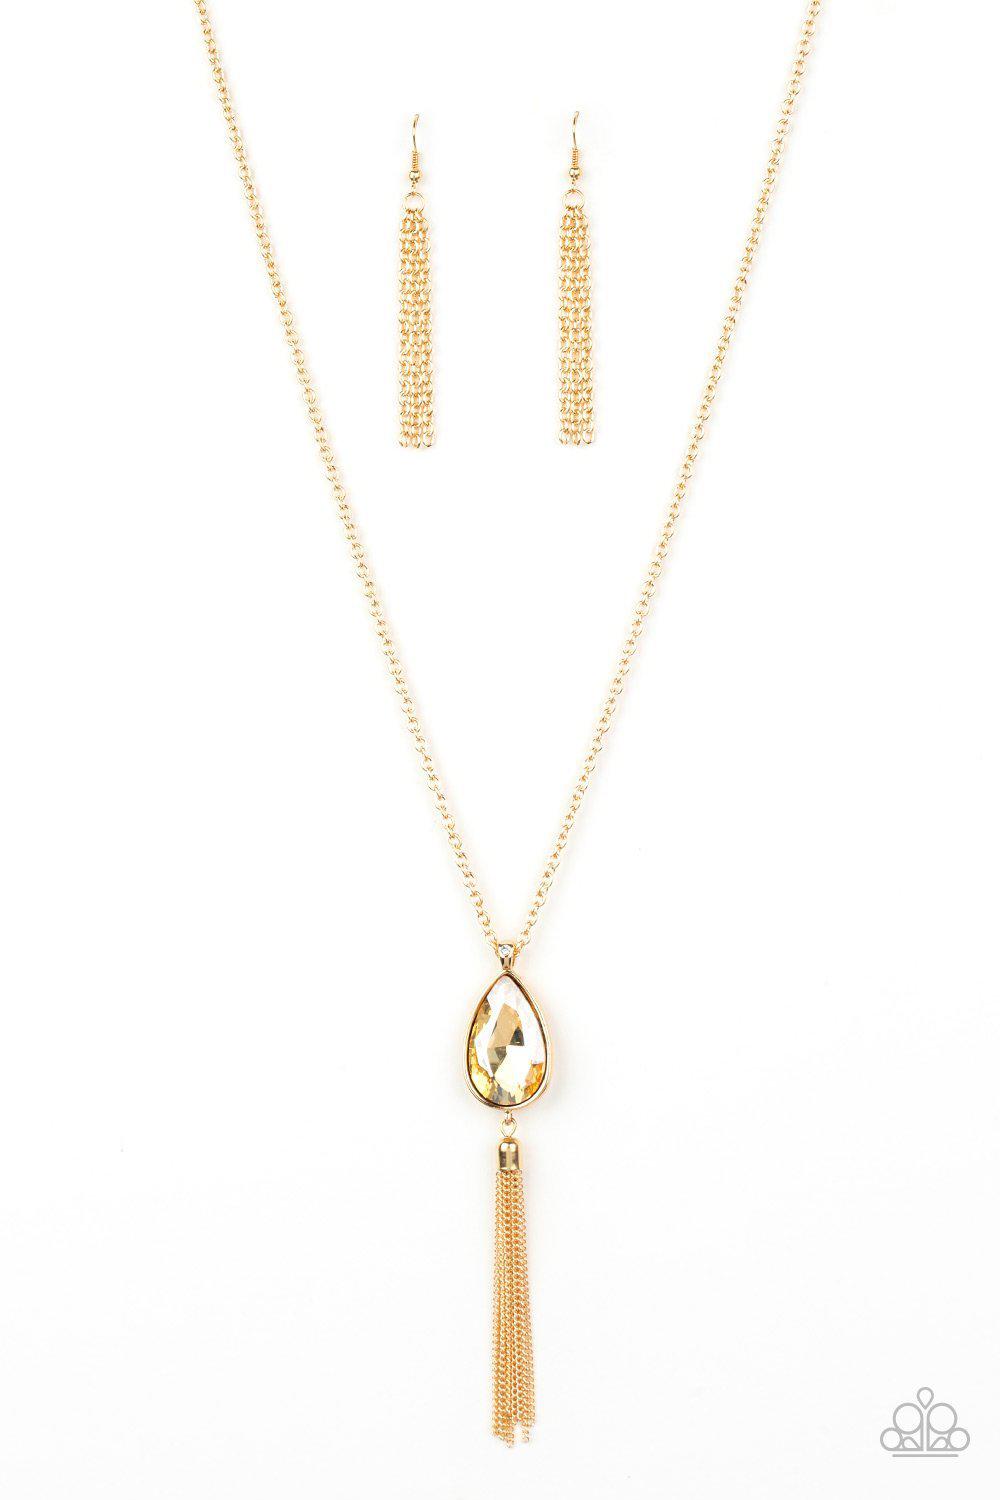 Elite Shine Gold Gem and Tassel Necklace - Paparazzi Accessories-CarasShop.com - $5 Jewelry by Cara Jewels